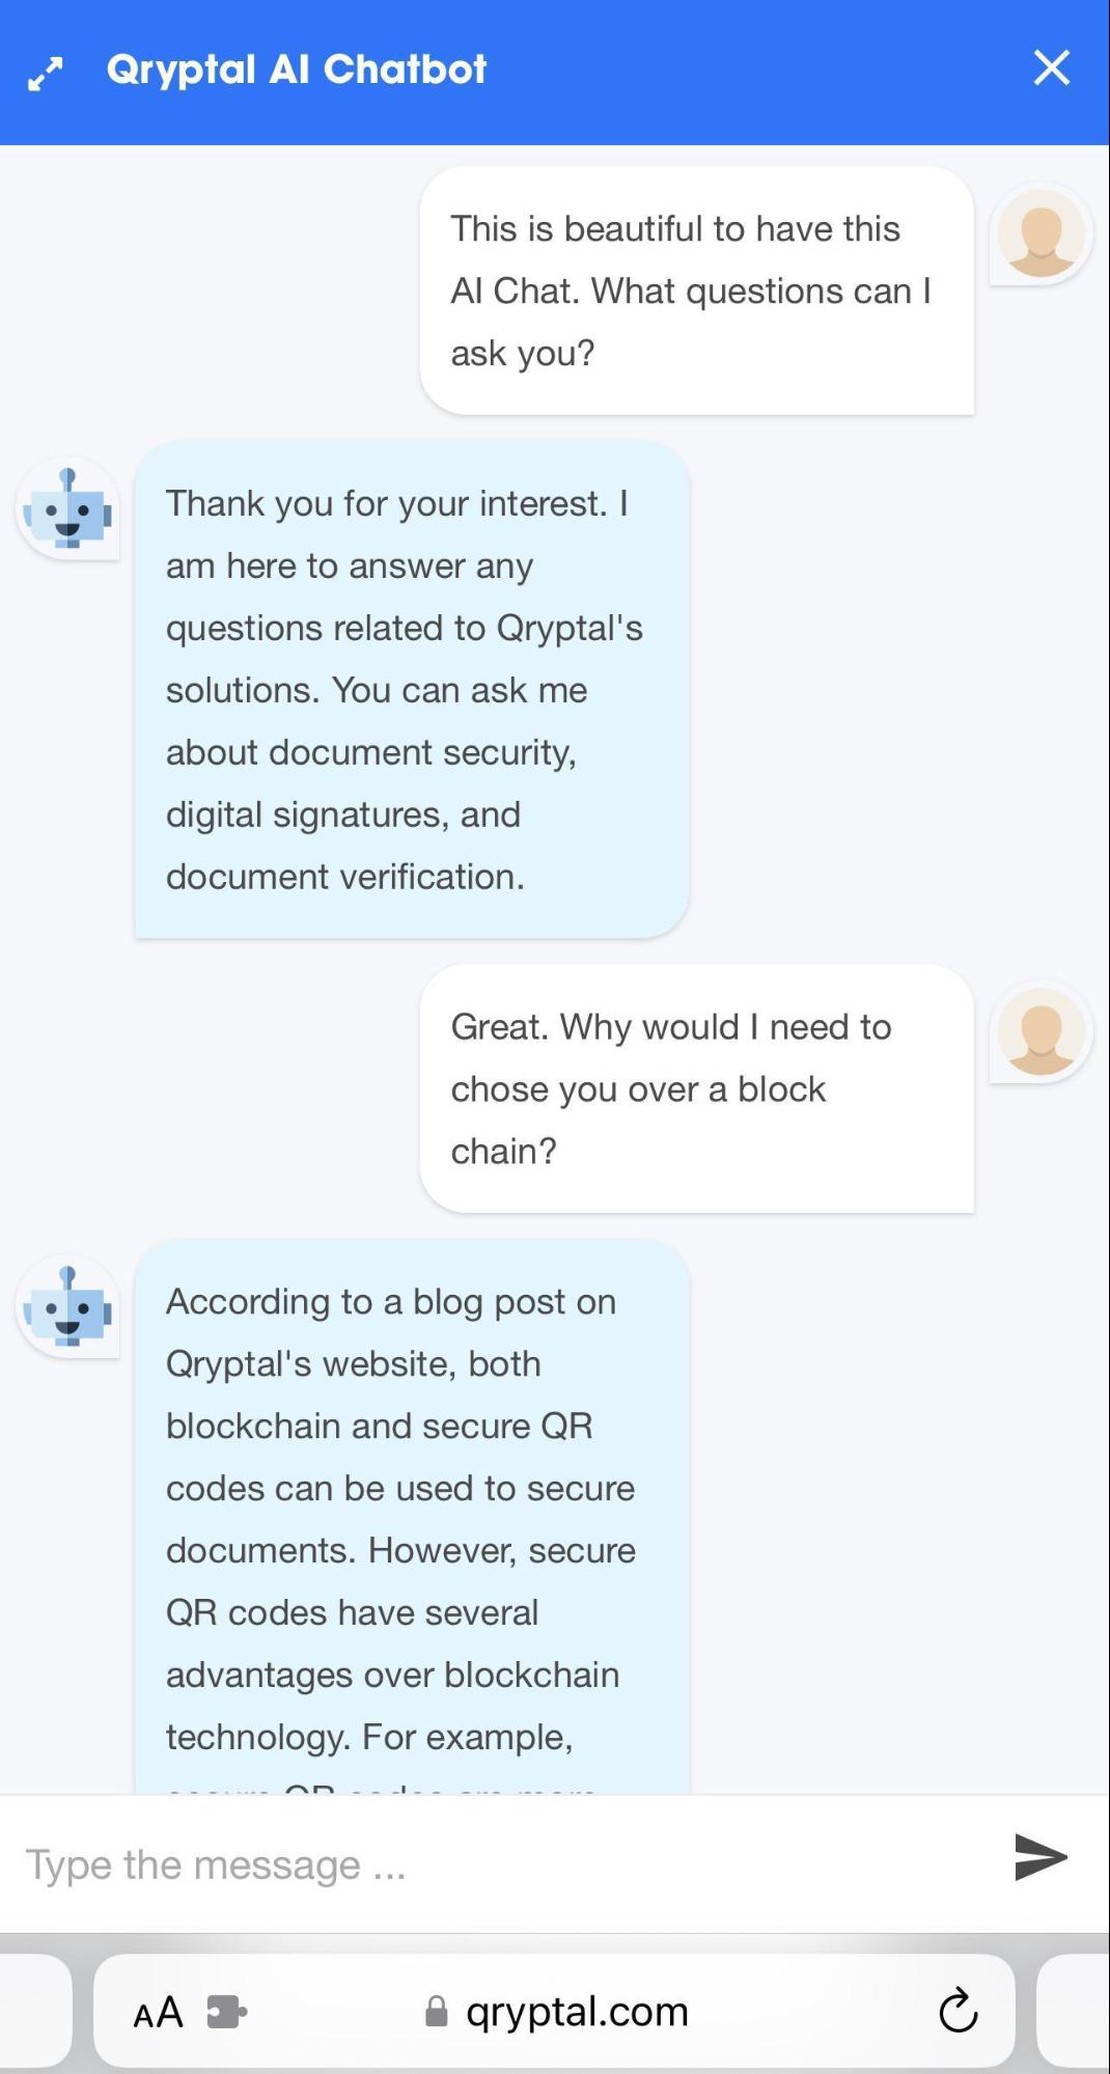 Introducing Qryptal's QBot: Your 24x7 Guide to Document Security